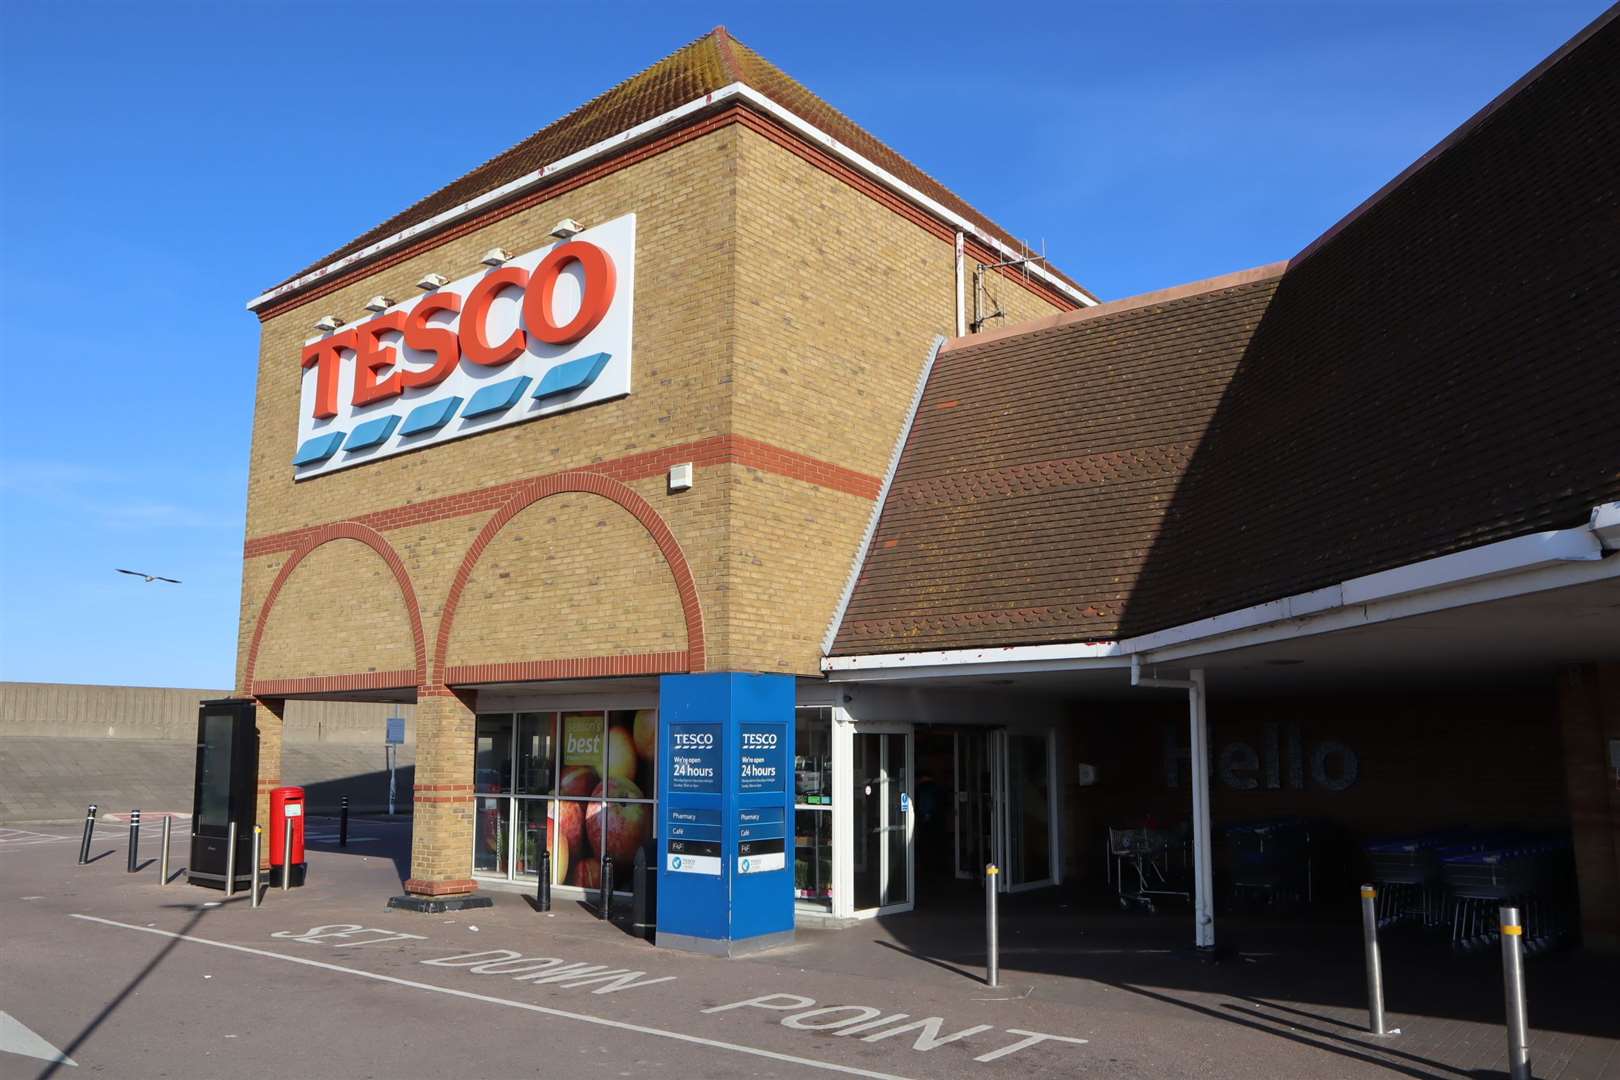 The Tesco store in Sheerness